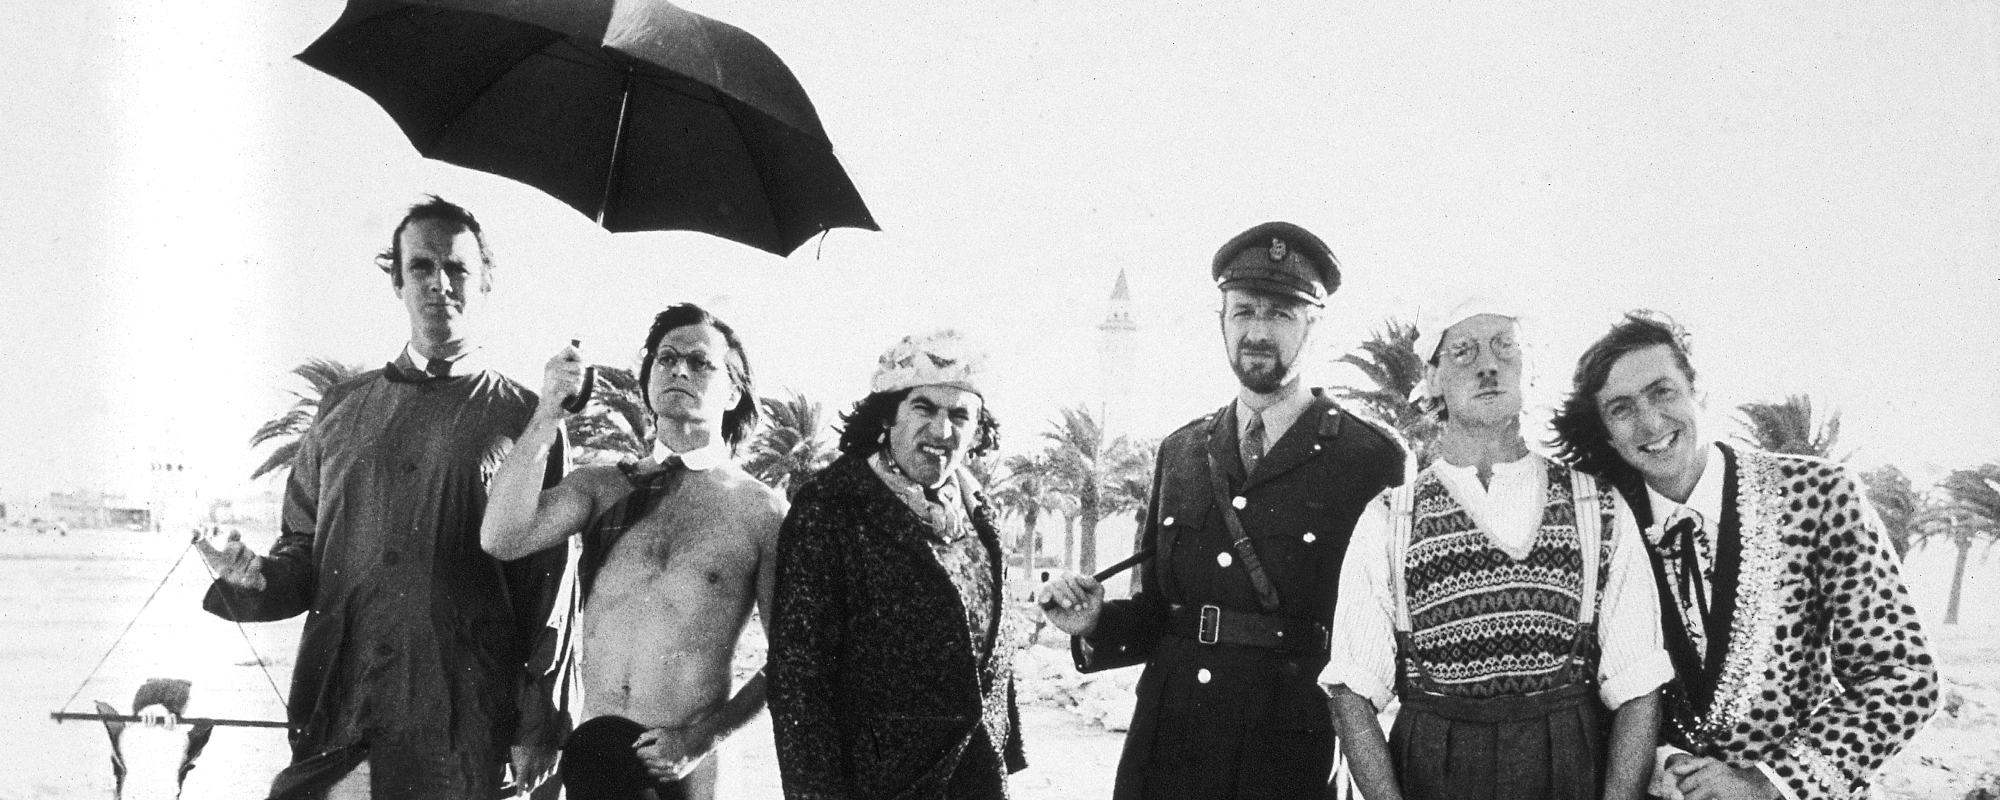 The Meaning Behind “Always Look on the Bright Side of Life” by Monty Python and the Rock Legend Who Got ‘Life of Brian’ Made